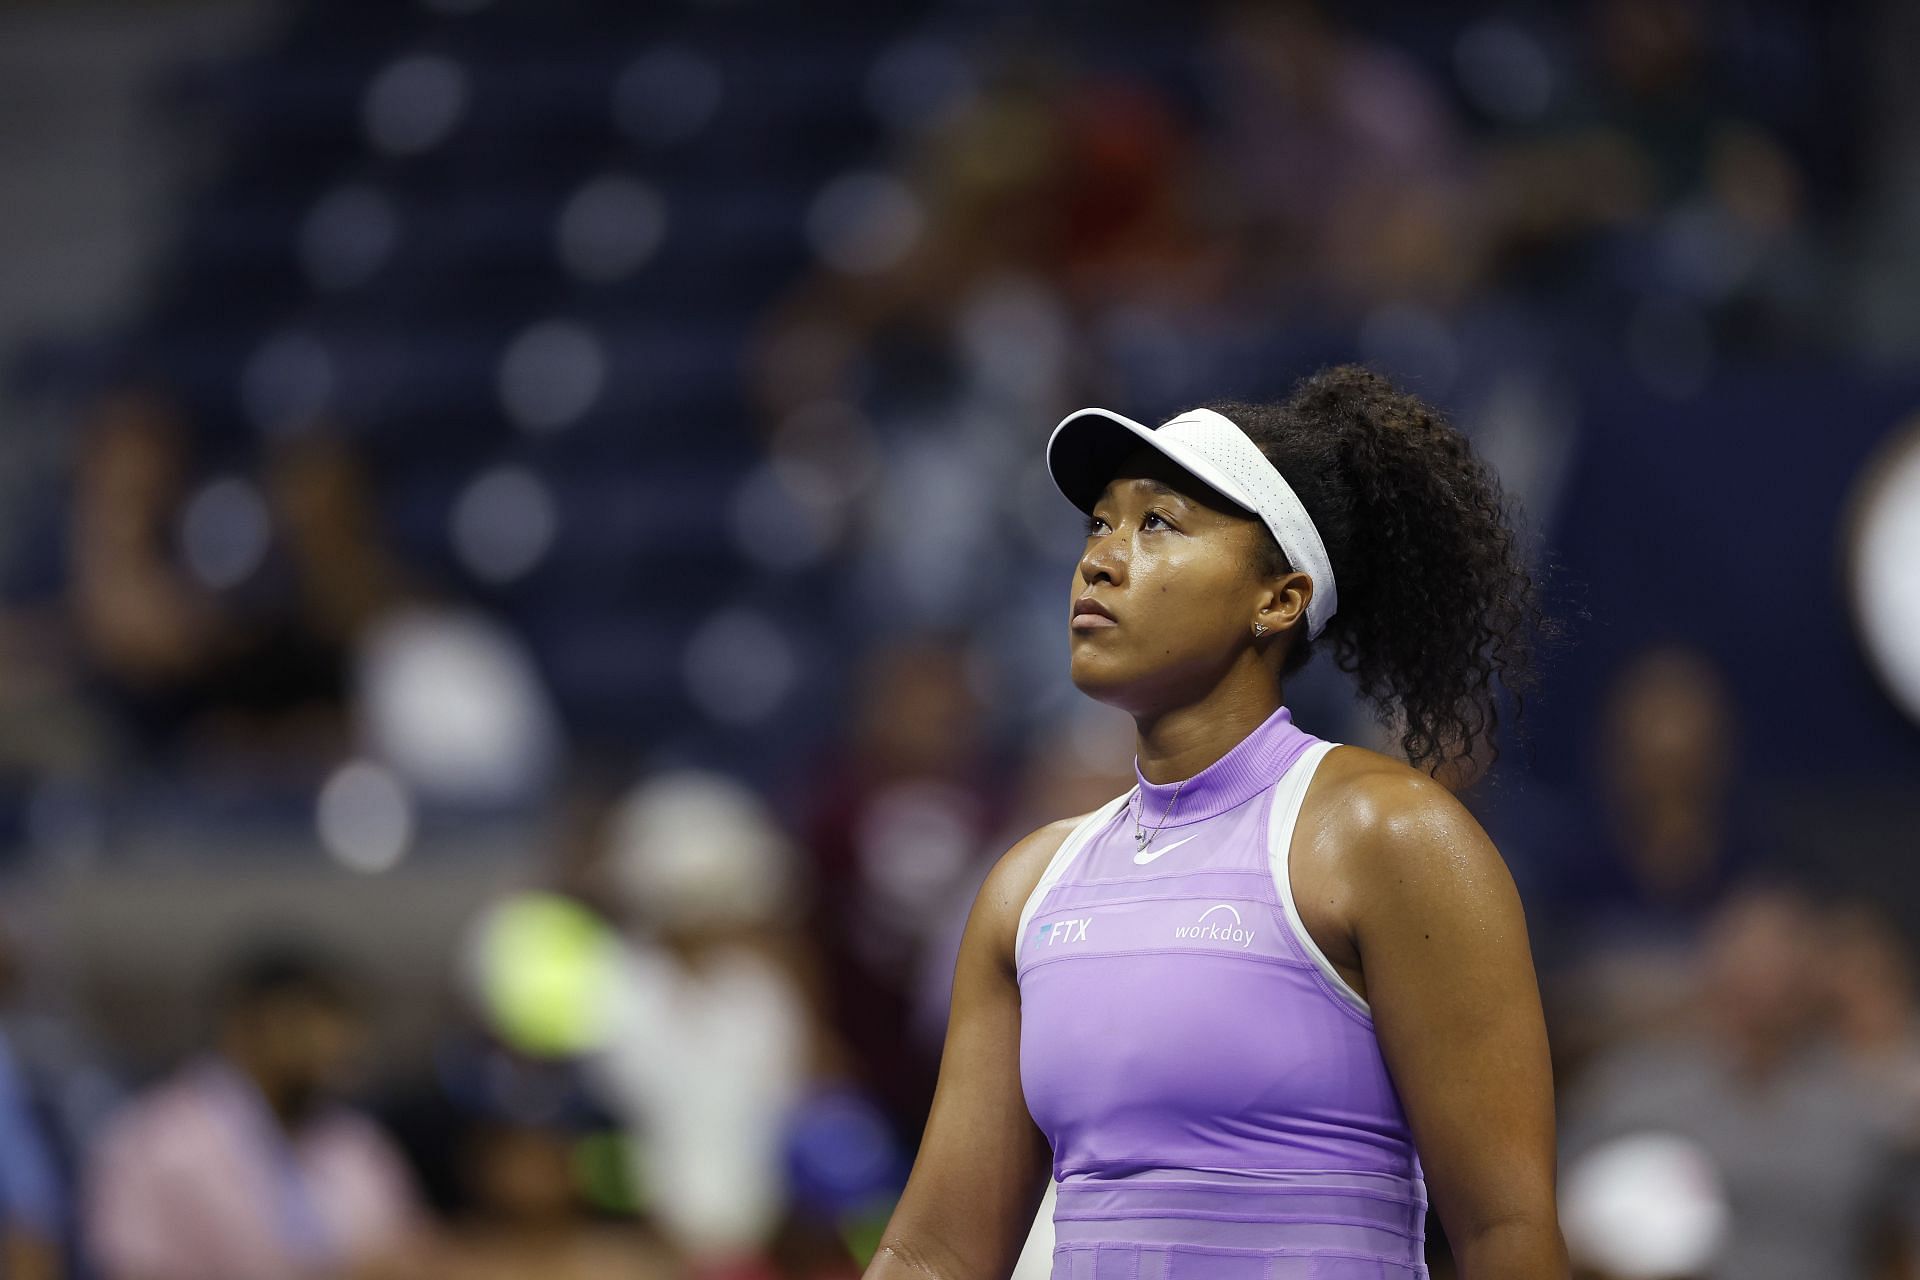 Naomi Osaka was forced to withdraw from the Tokyo Open